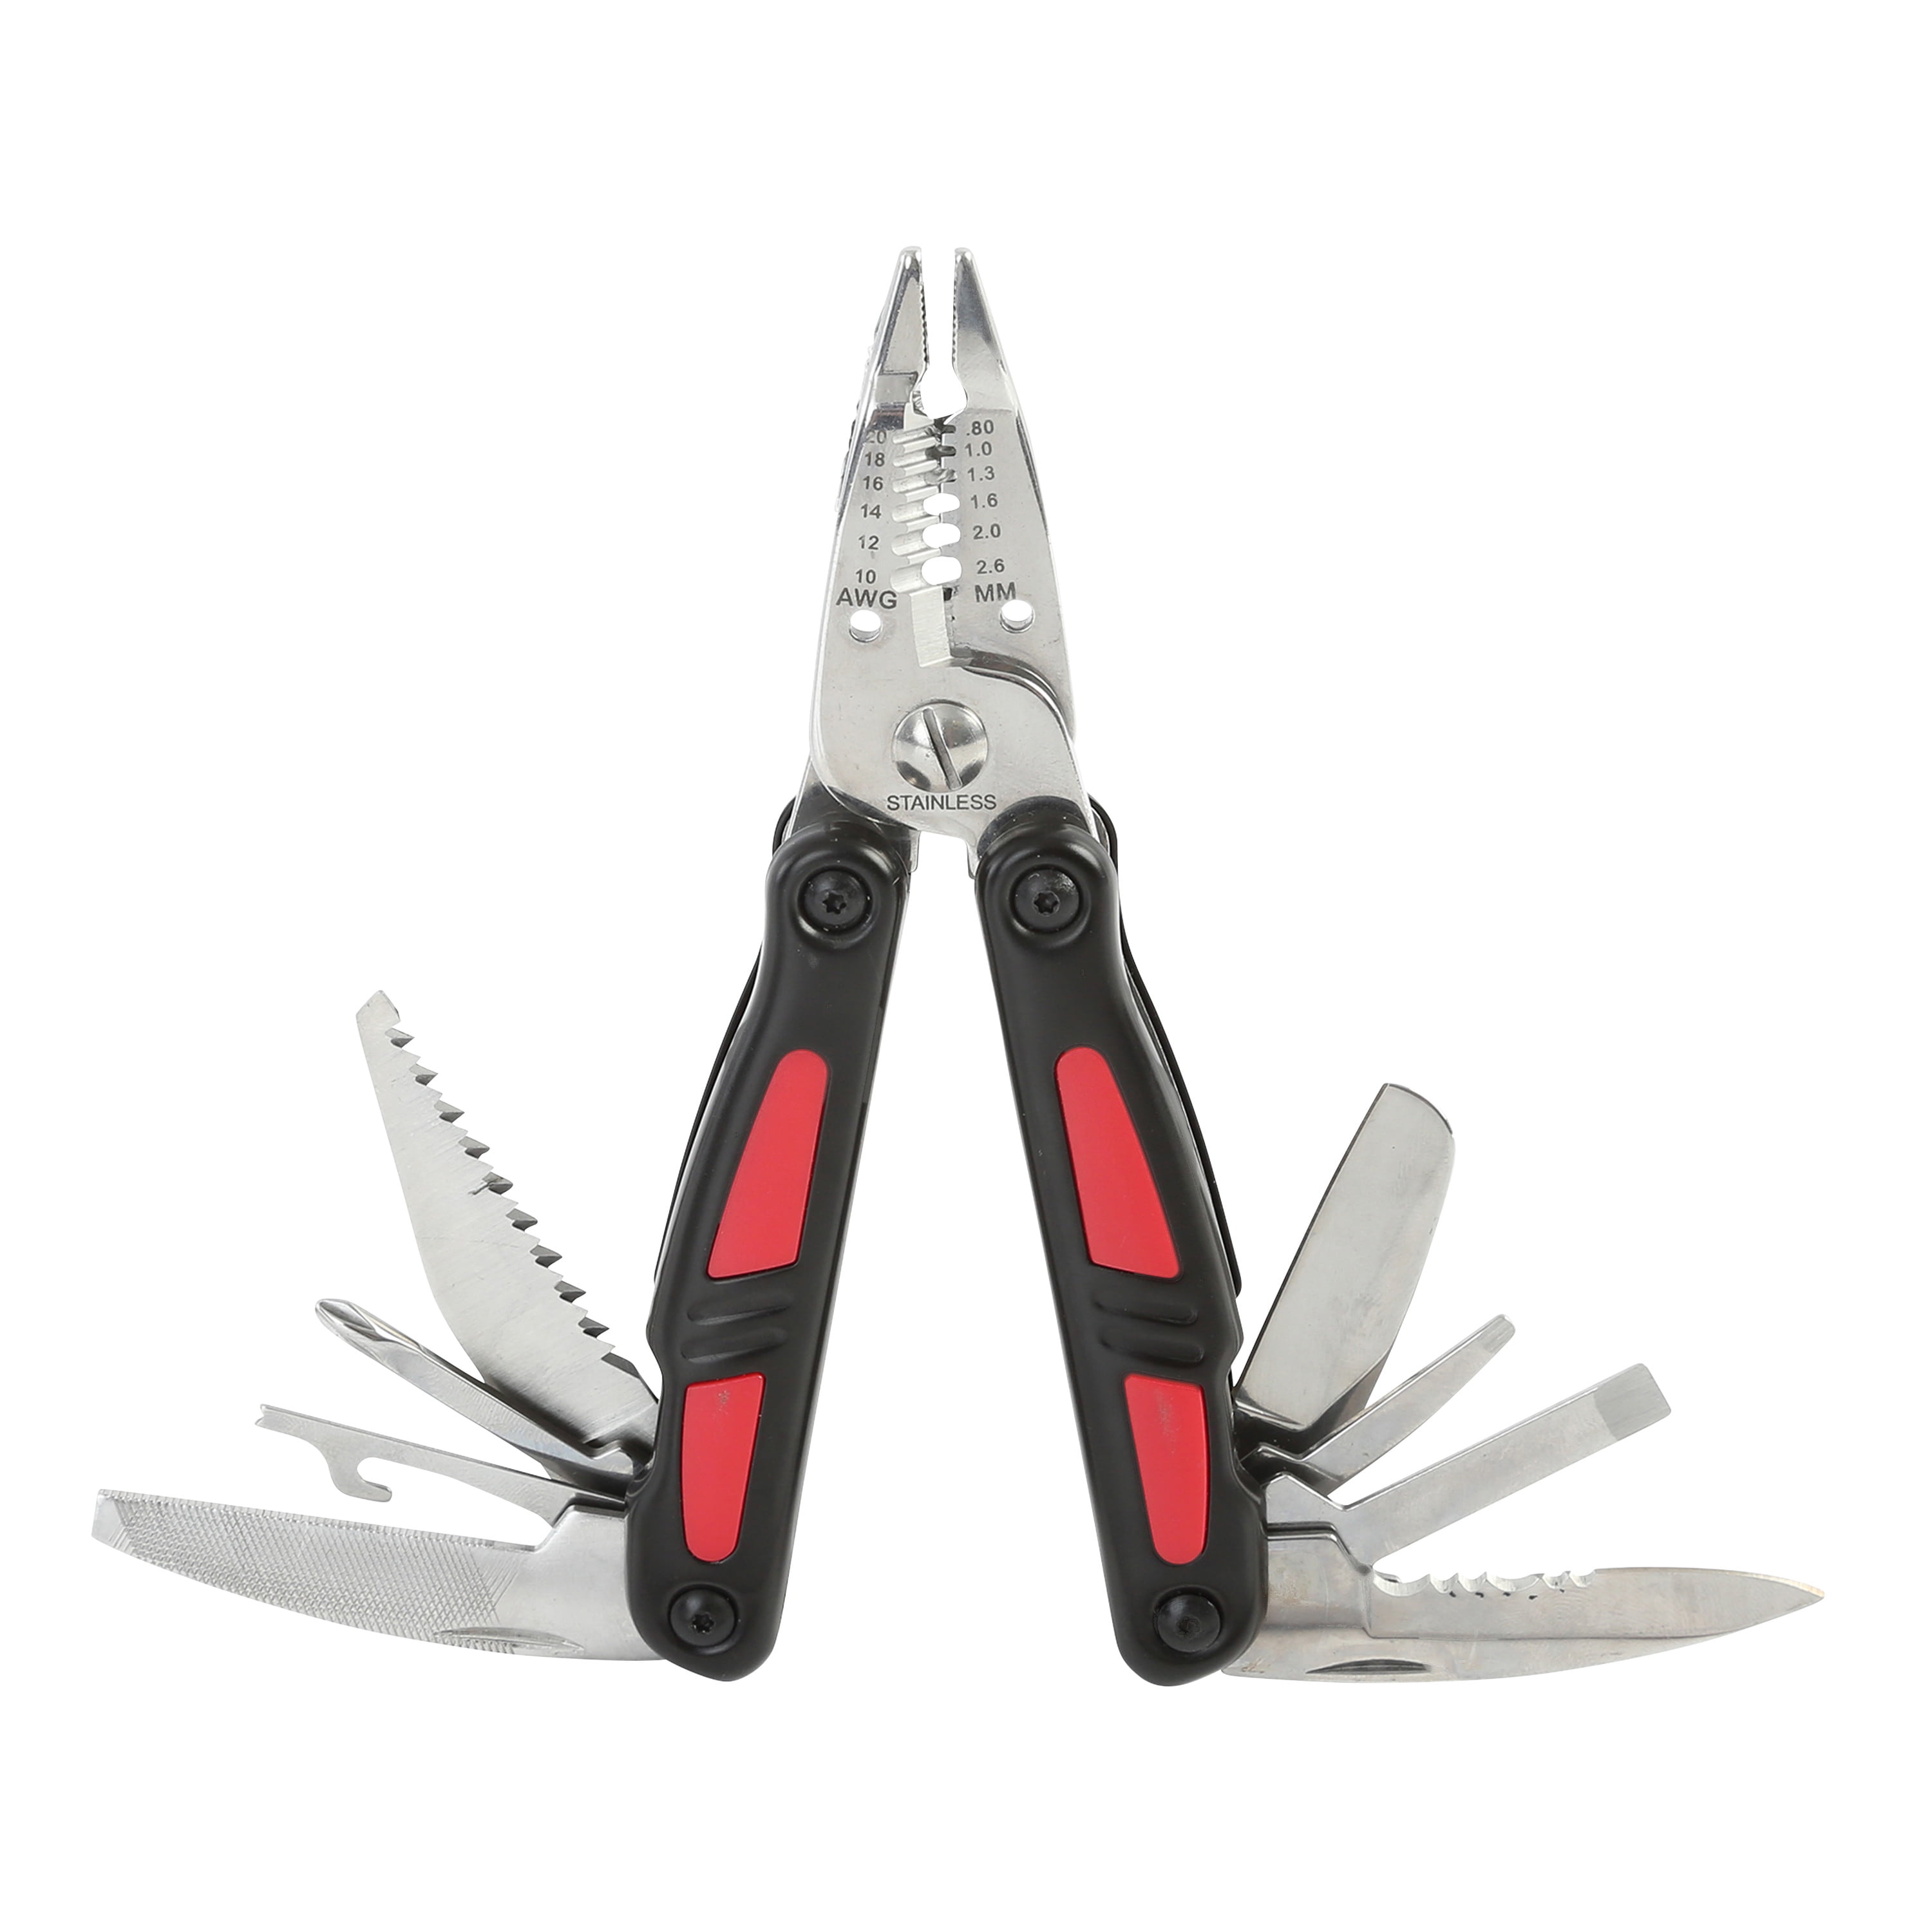 Buy teledyne wire stripper Online in OMAN at Low Prices at desertcart